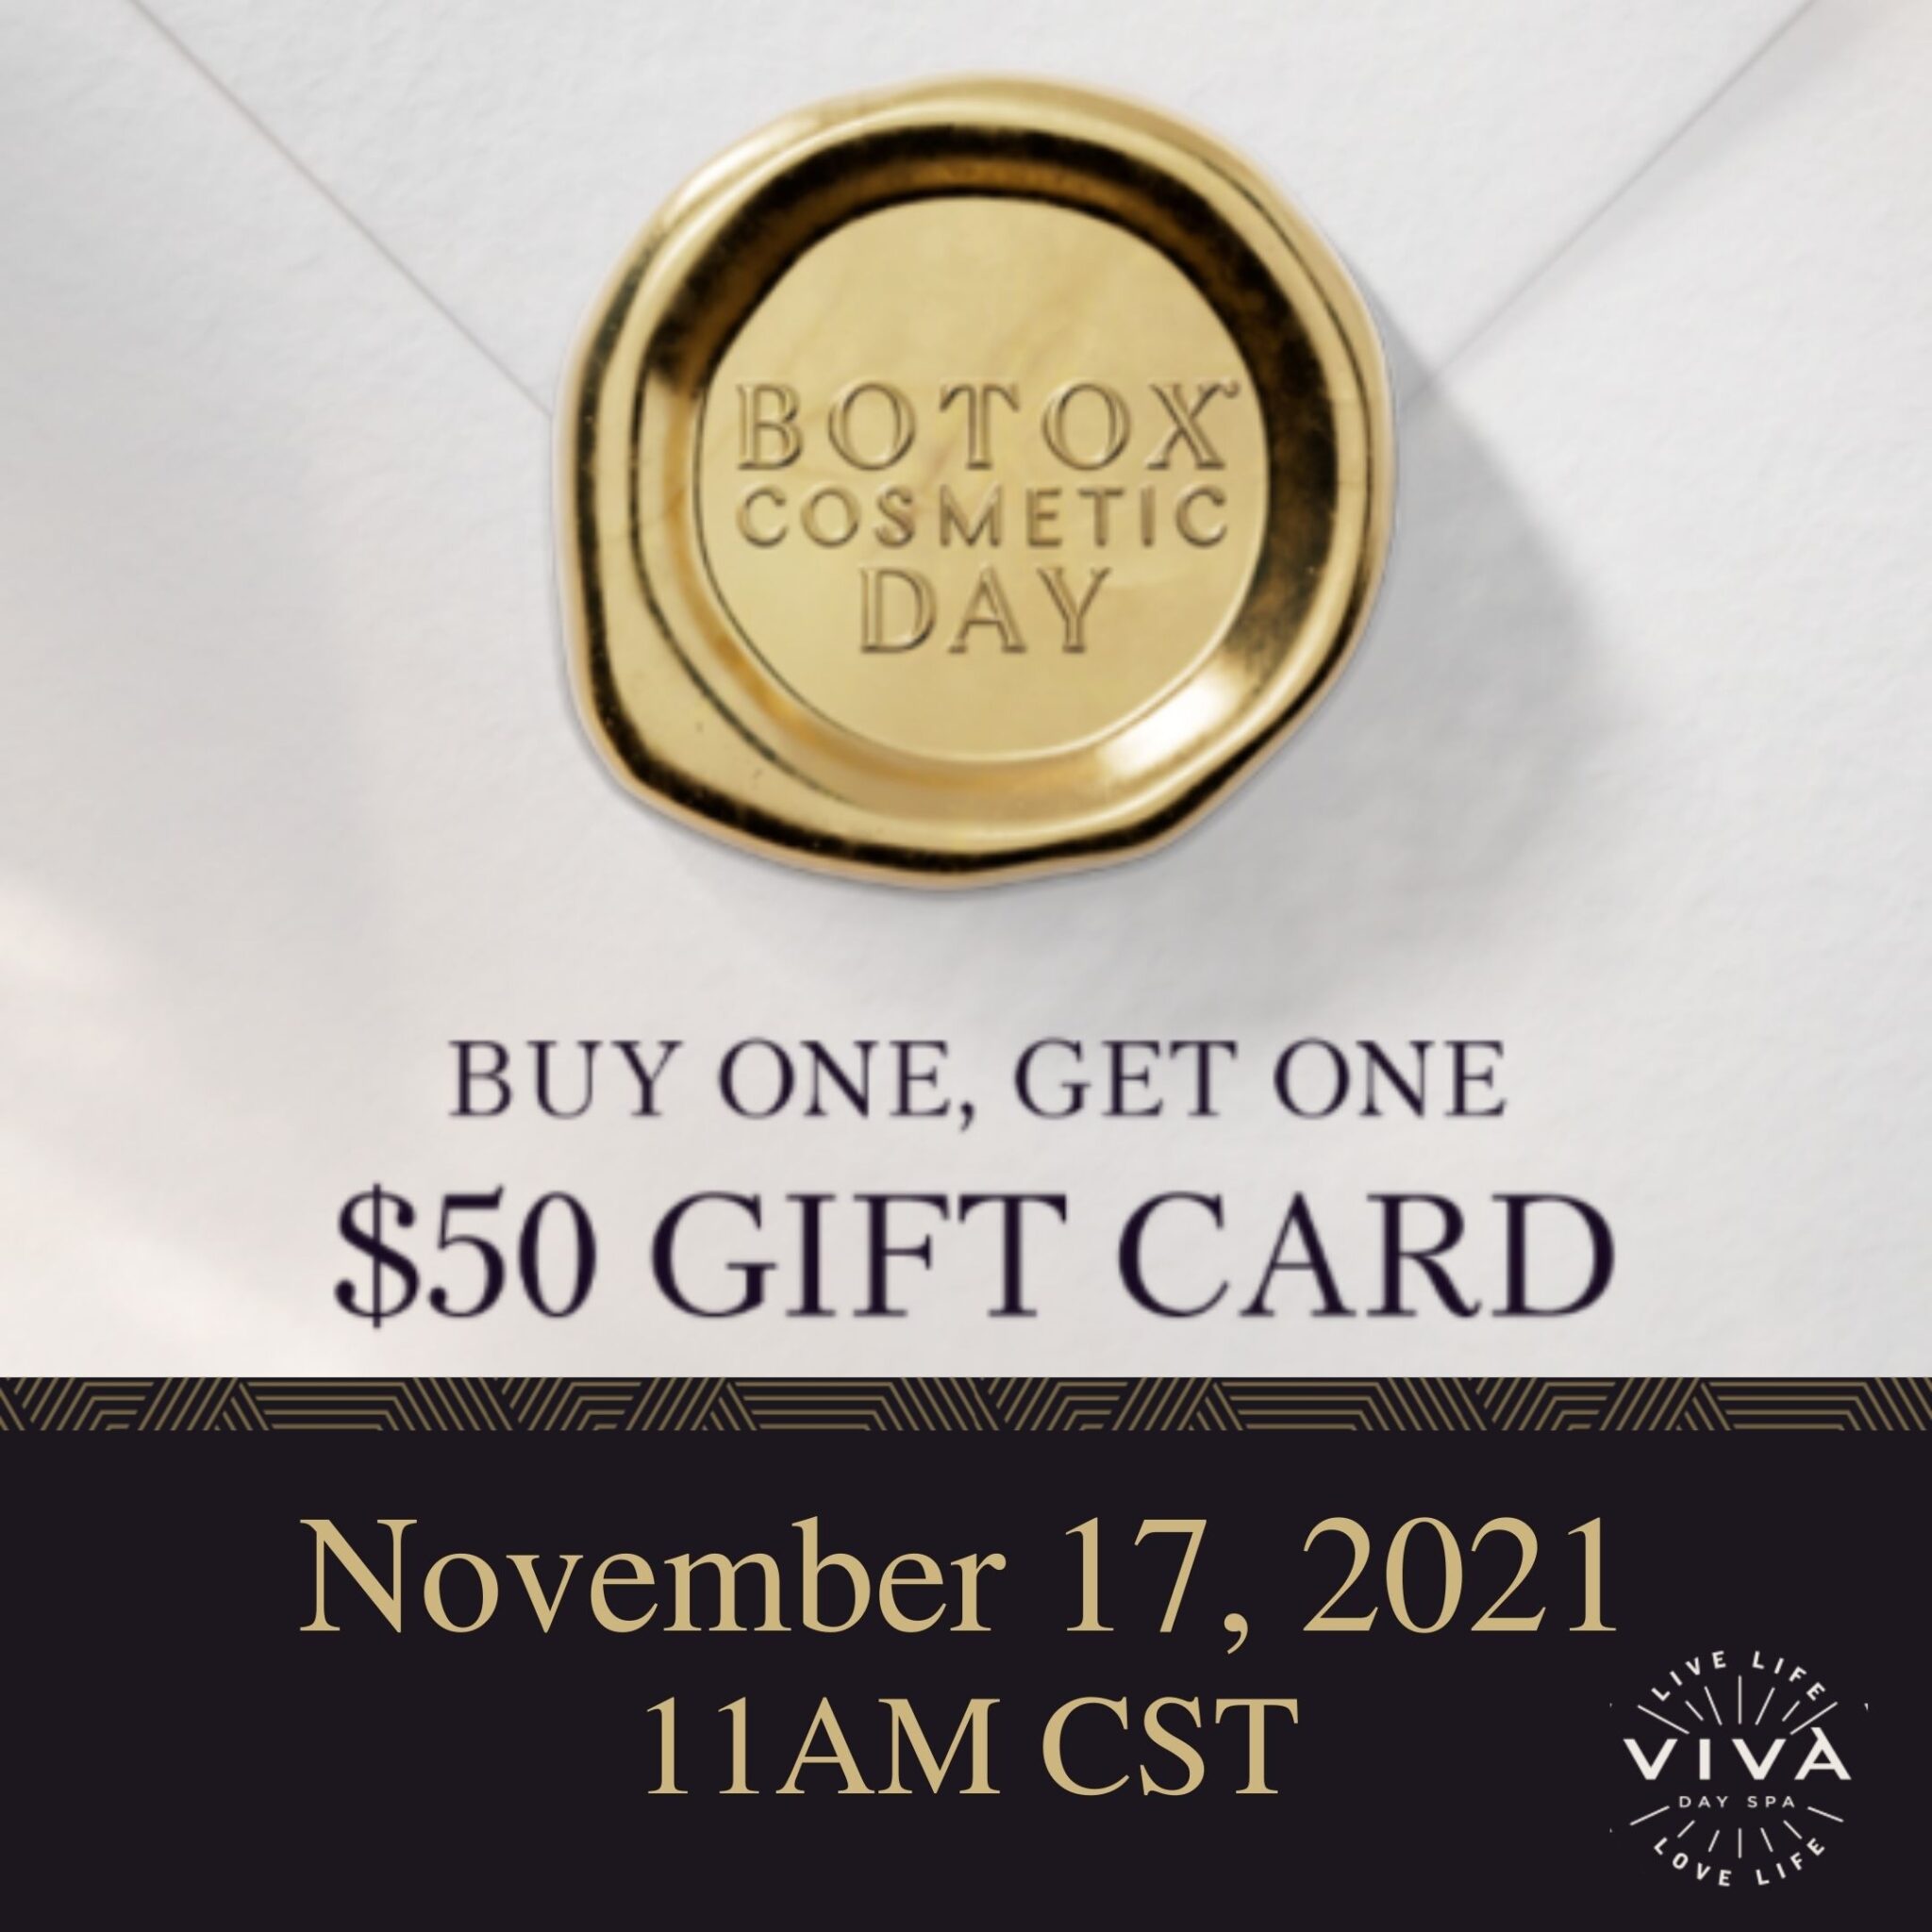 The Botox Cosmetic Day Buy One, Get One $50 Gift Card Offer is on November 17, 2021.